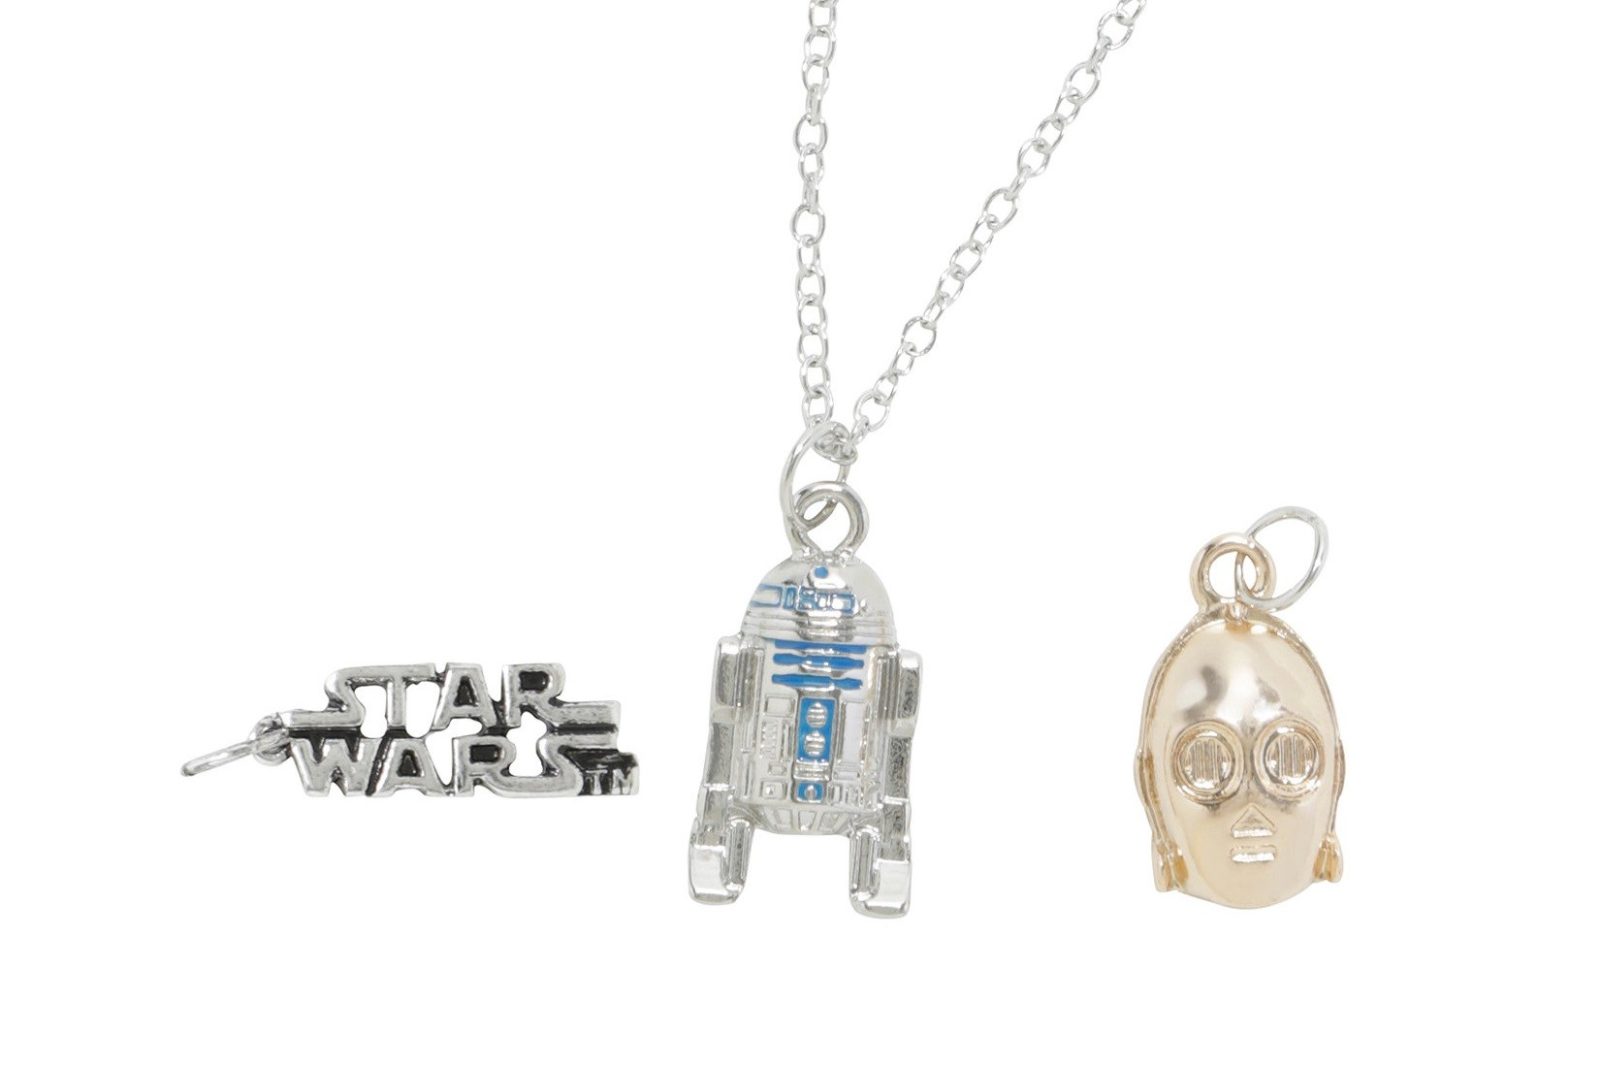 New Star Wars droids charm necklace